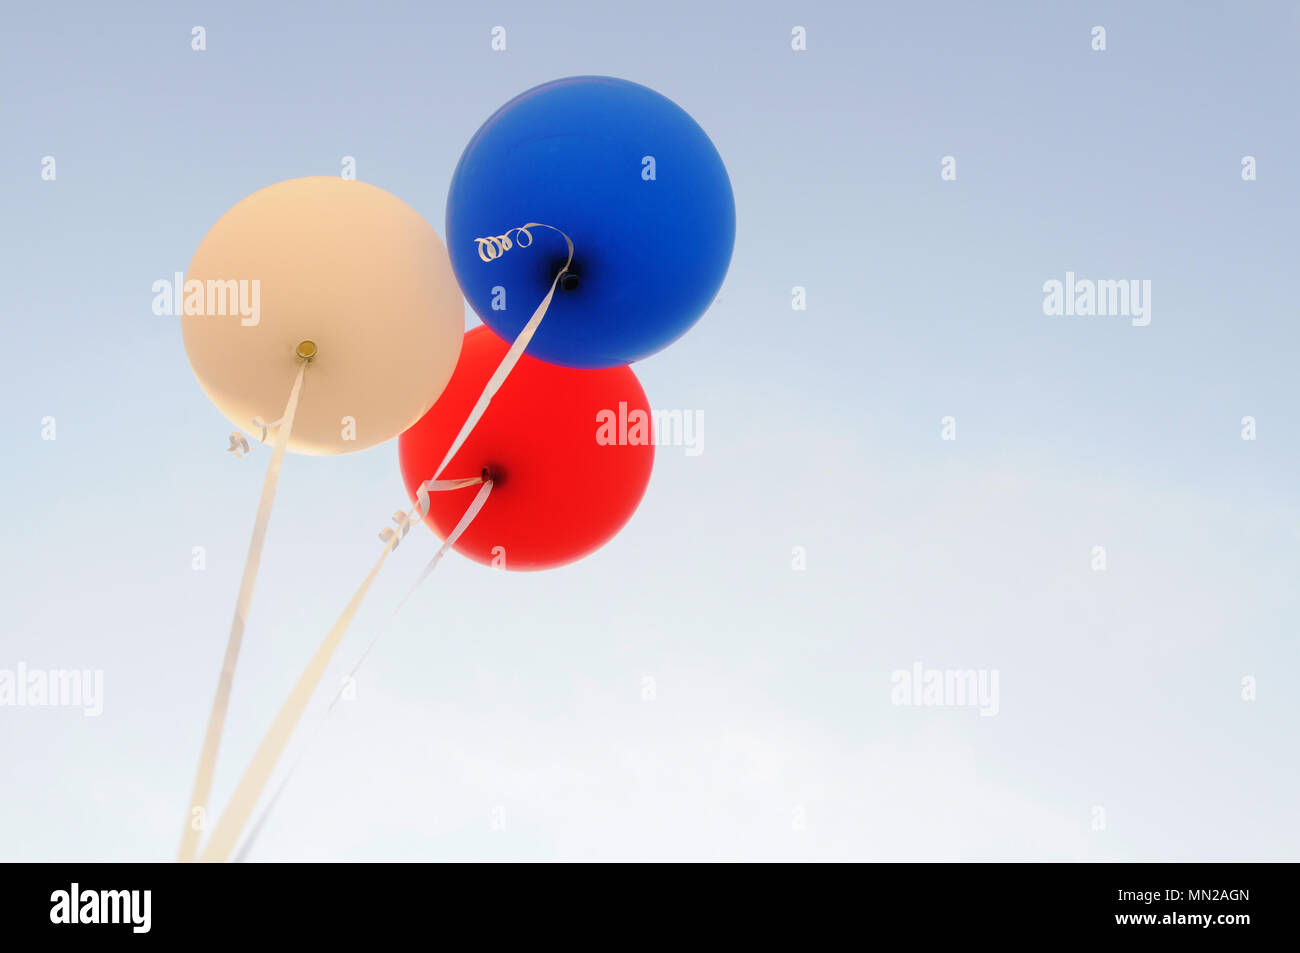 Balloons in white, blue and red with copy space Stock Photo